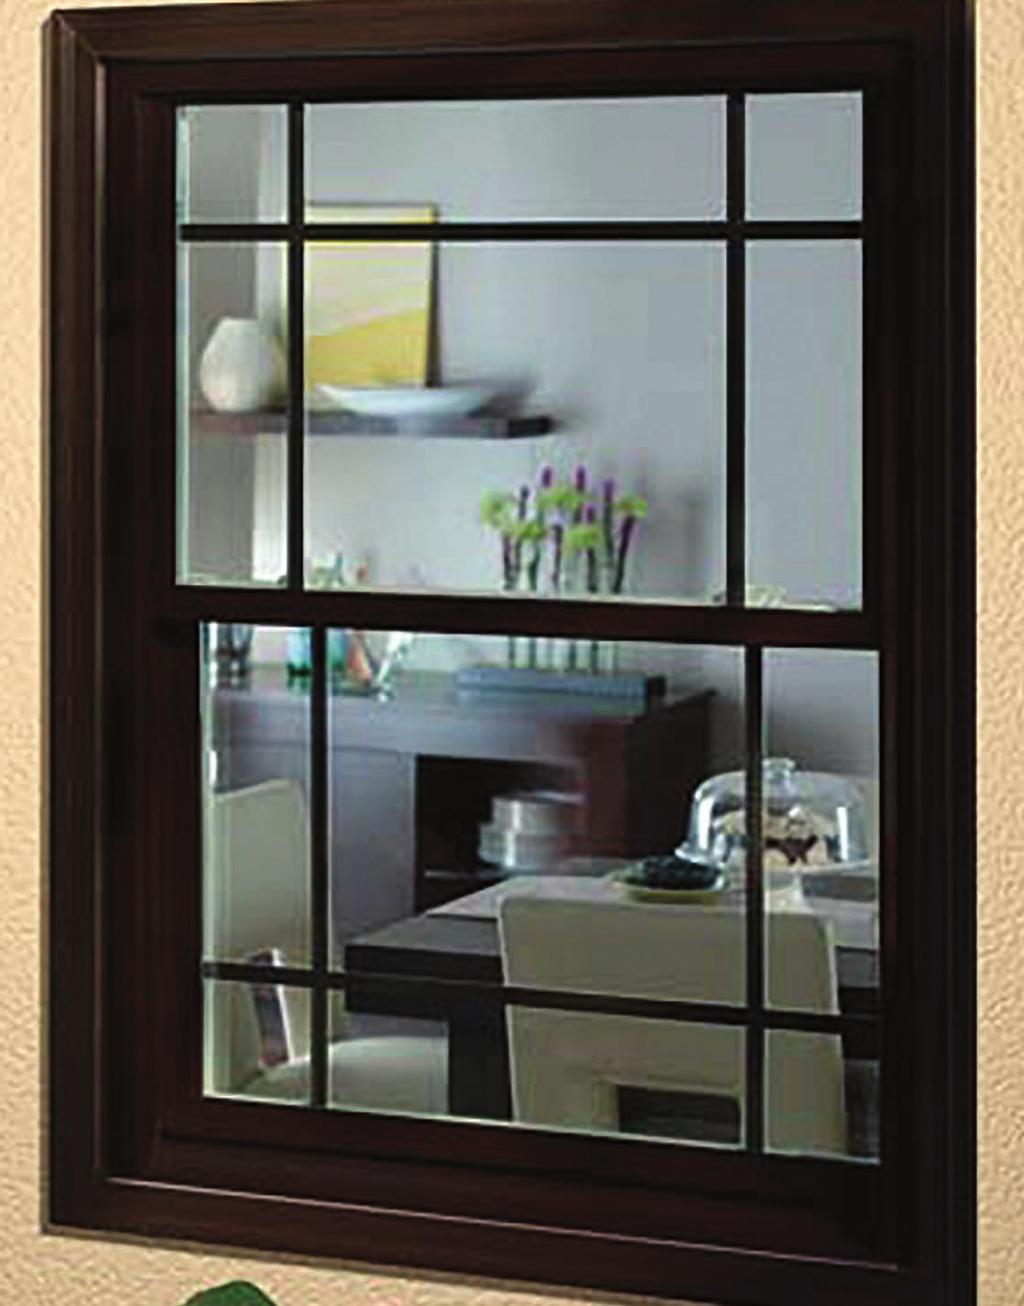 PRDUCT SUMMARY BLCK FRAM Pella 350 Series Double-Hung windows feature an extruded, rigid PVC (polyvinyl chloride) frame and sash with heat-fused mitered corners for a fully welded corner assembly.